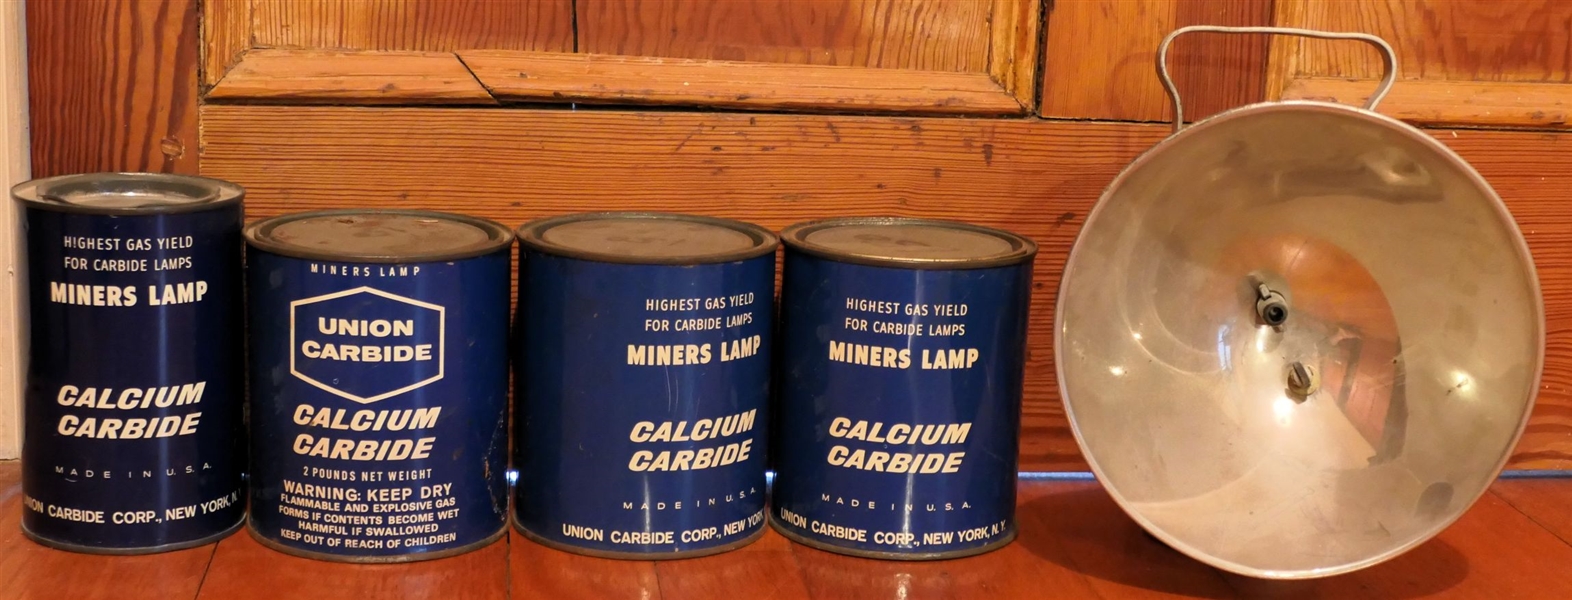 Justrite Miners Lantern with 3 Full and 1 Partial Tin of Miners Lamp Calcium Carbide 